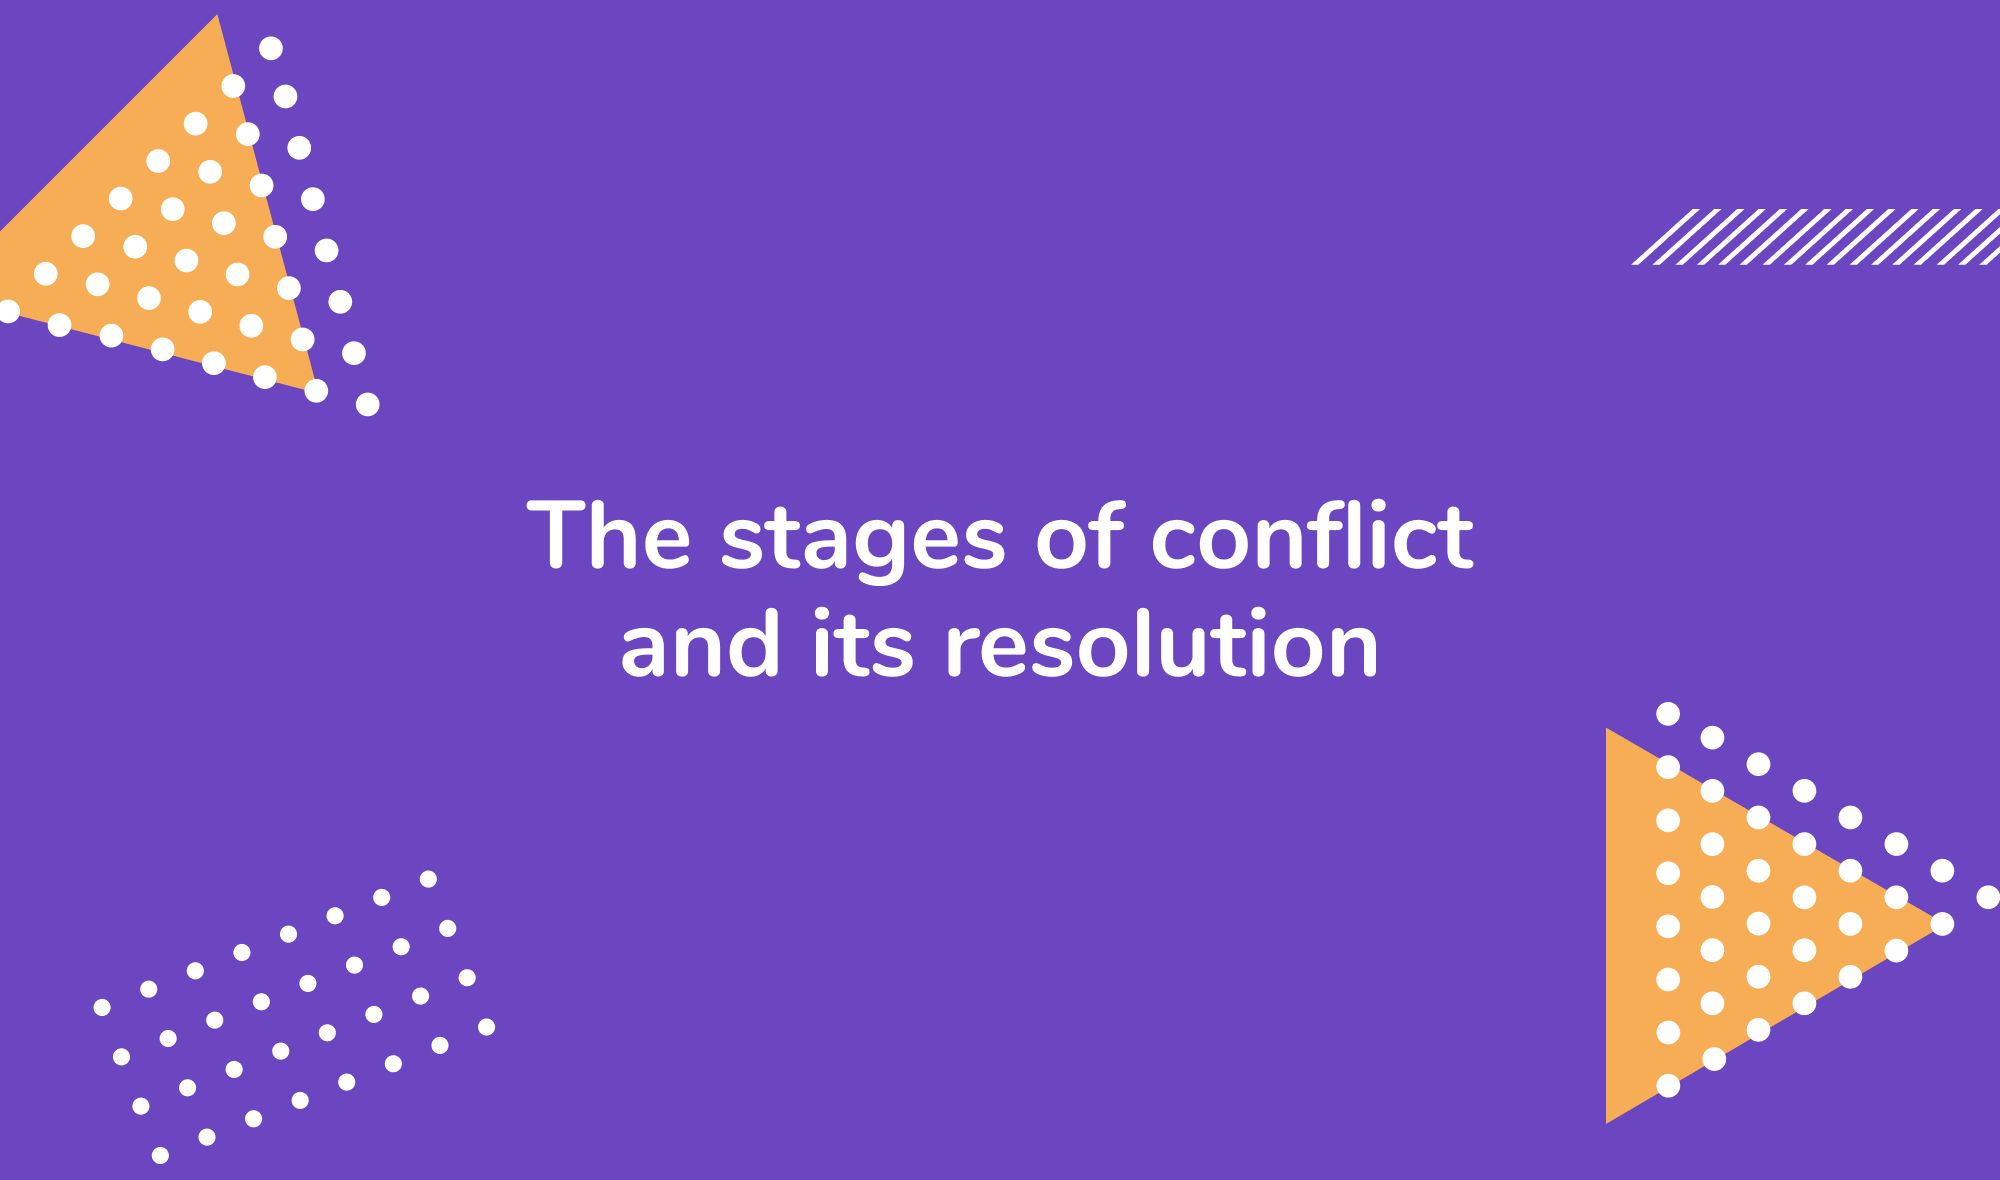 The stages of conflict and its resolution